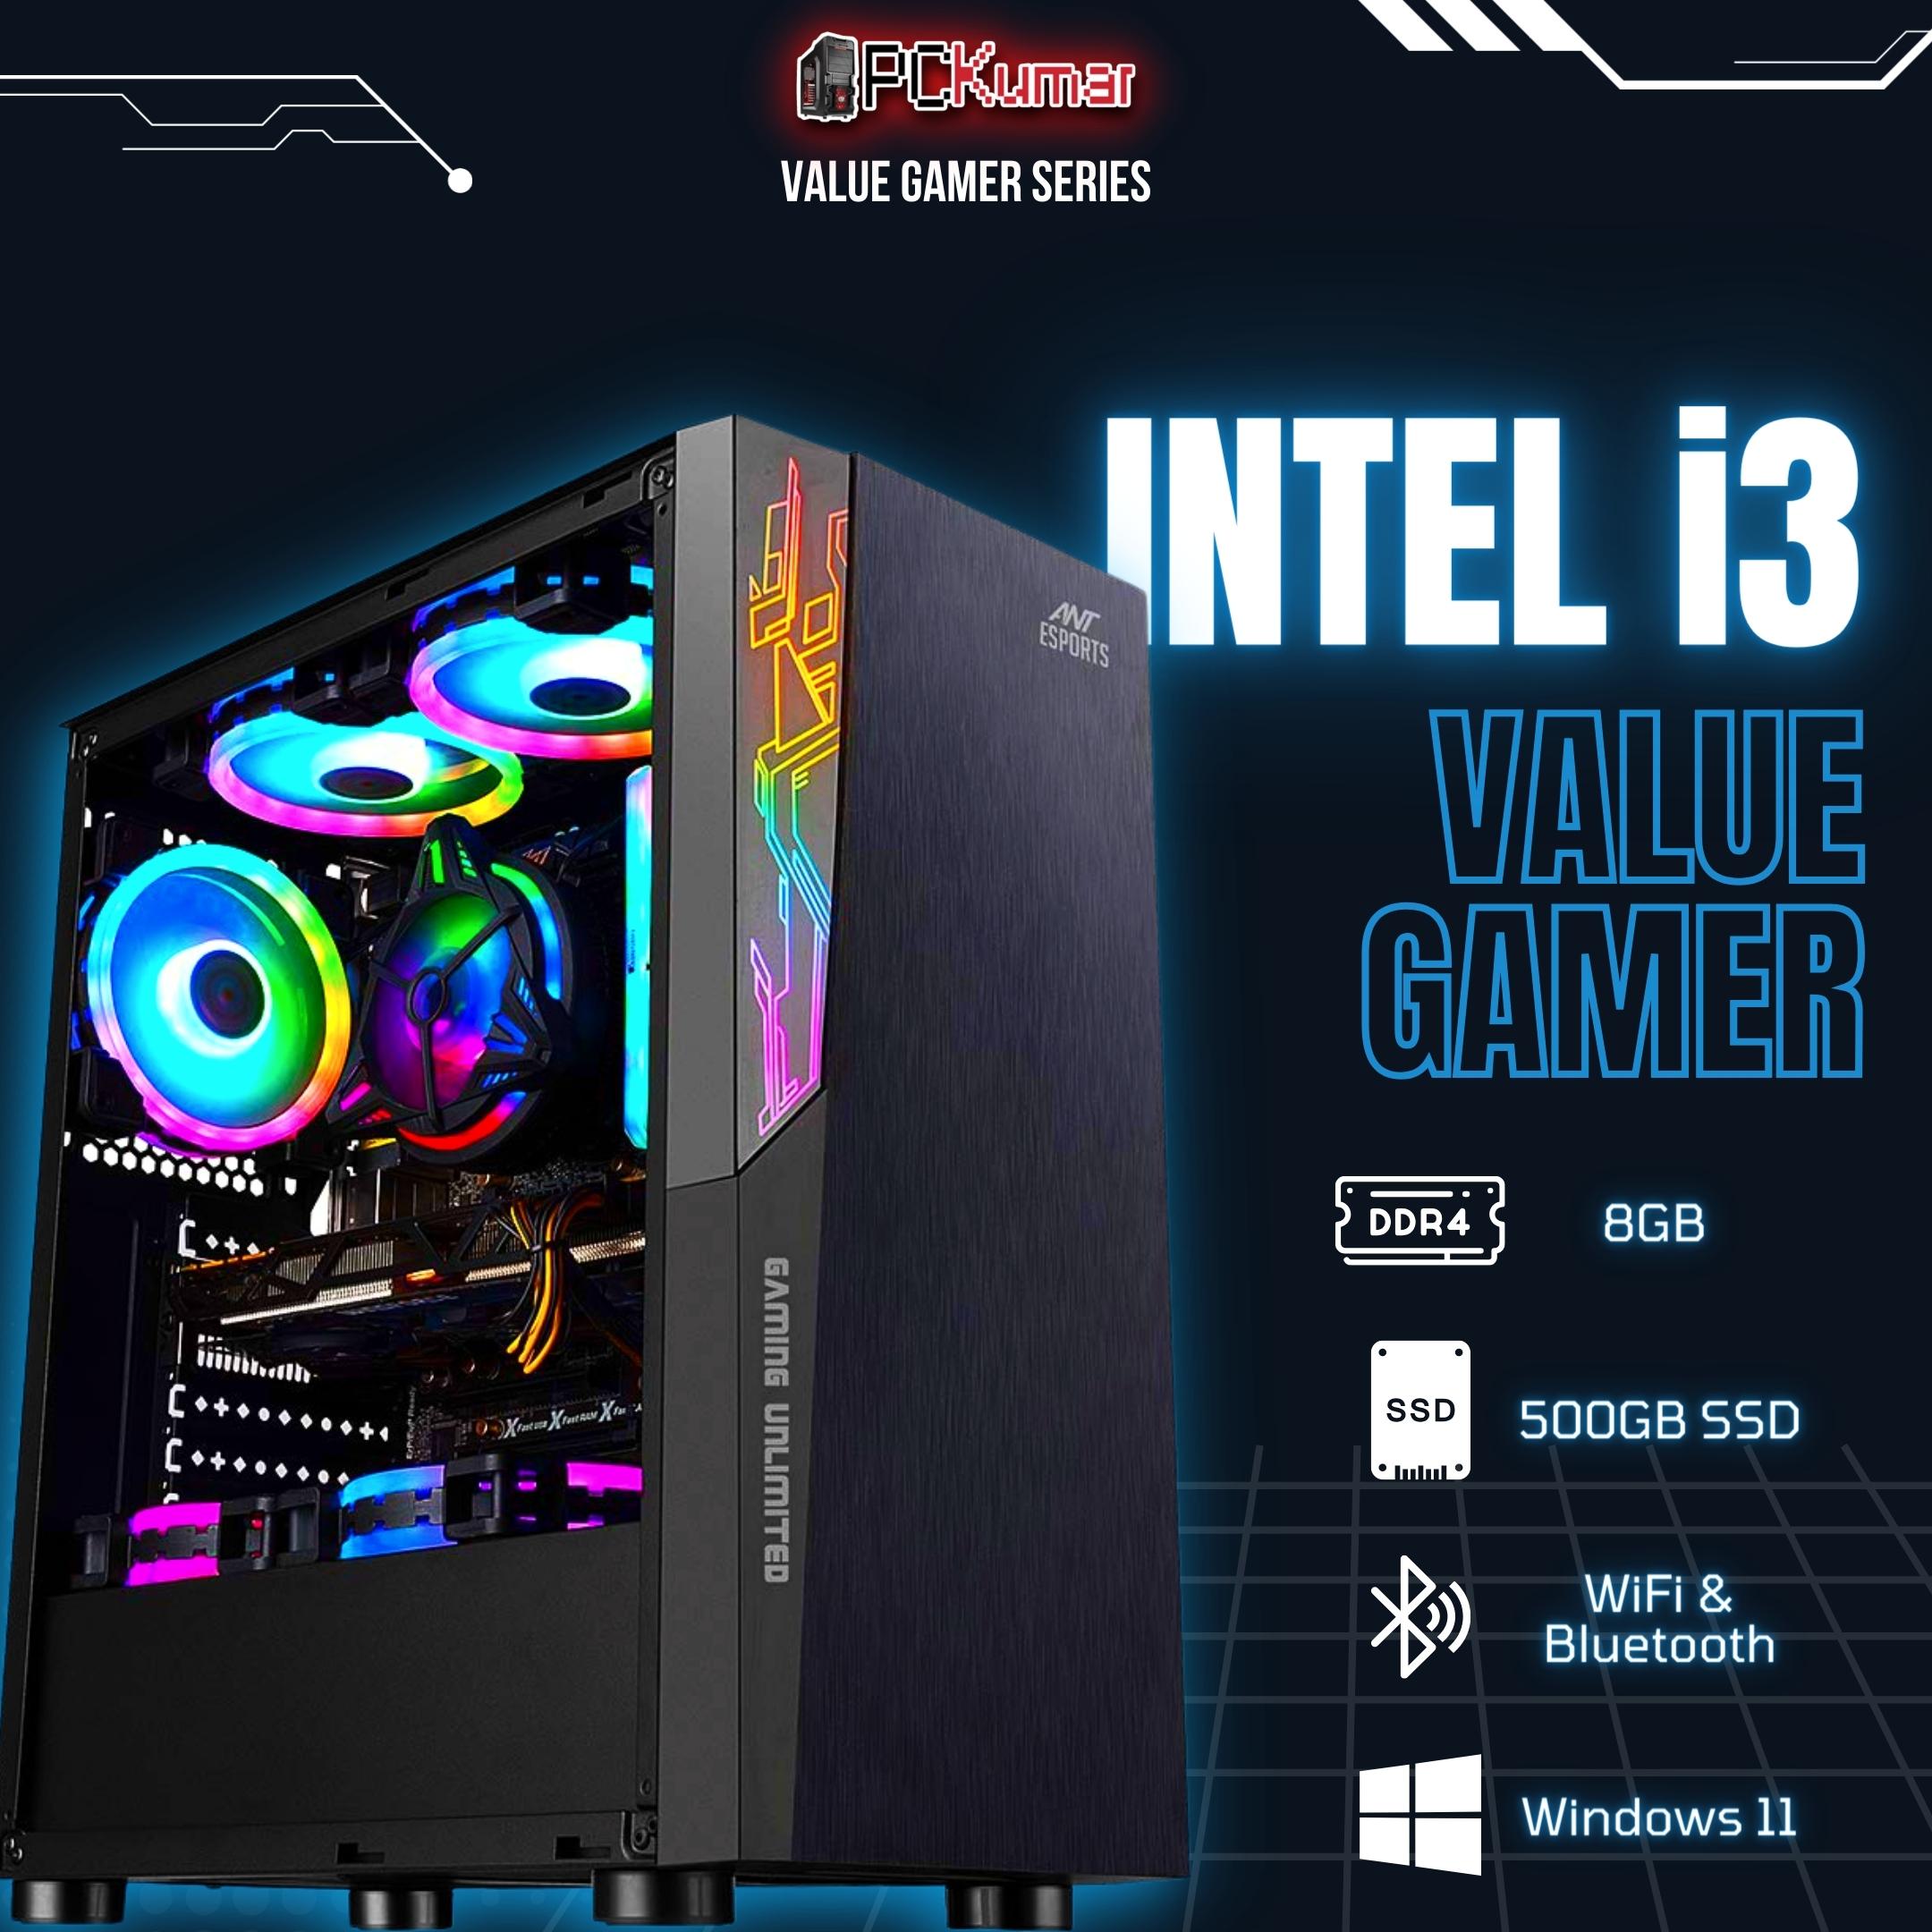 Value Gaming with Intel i3 10th gen + RX 550 4GB